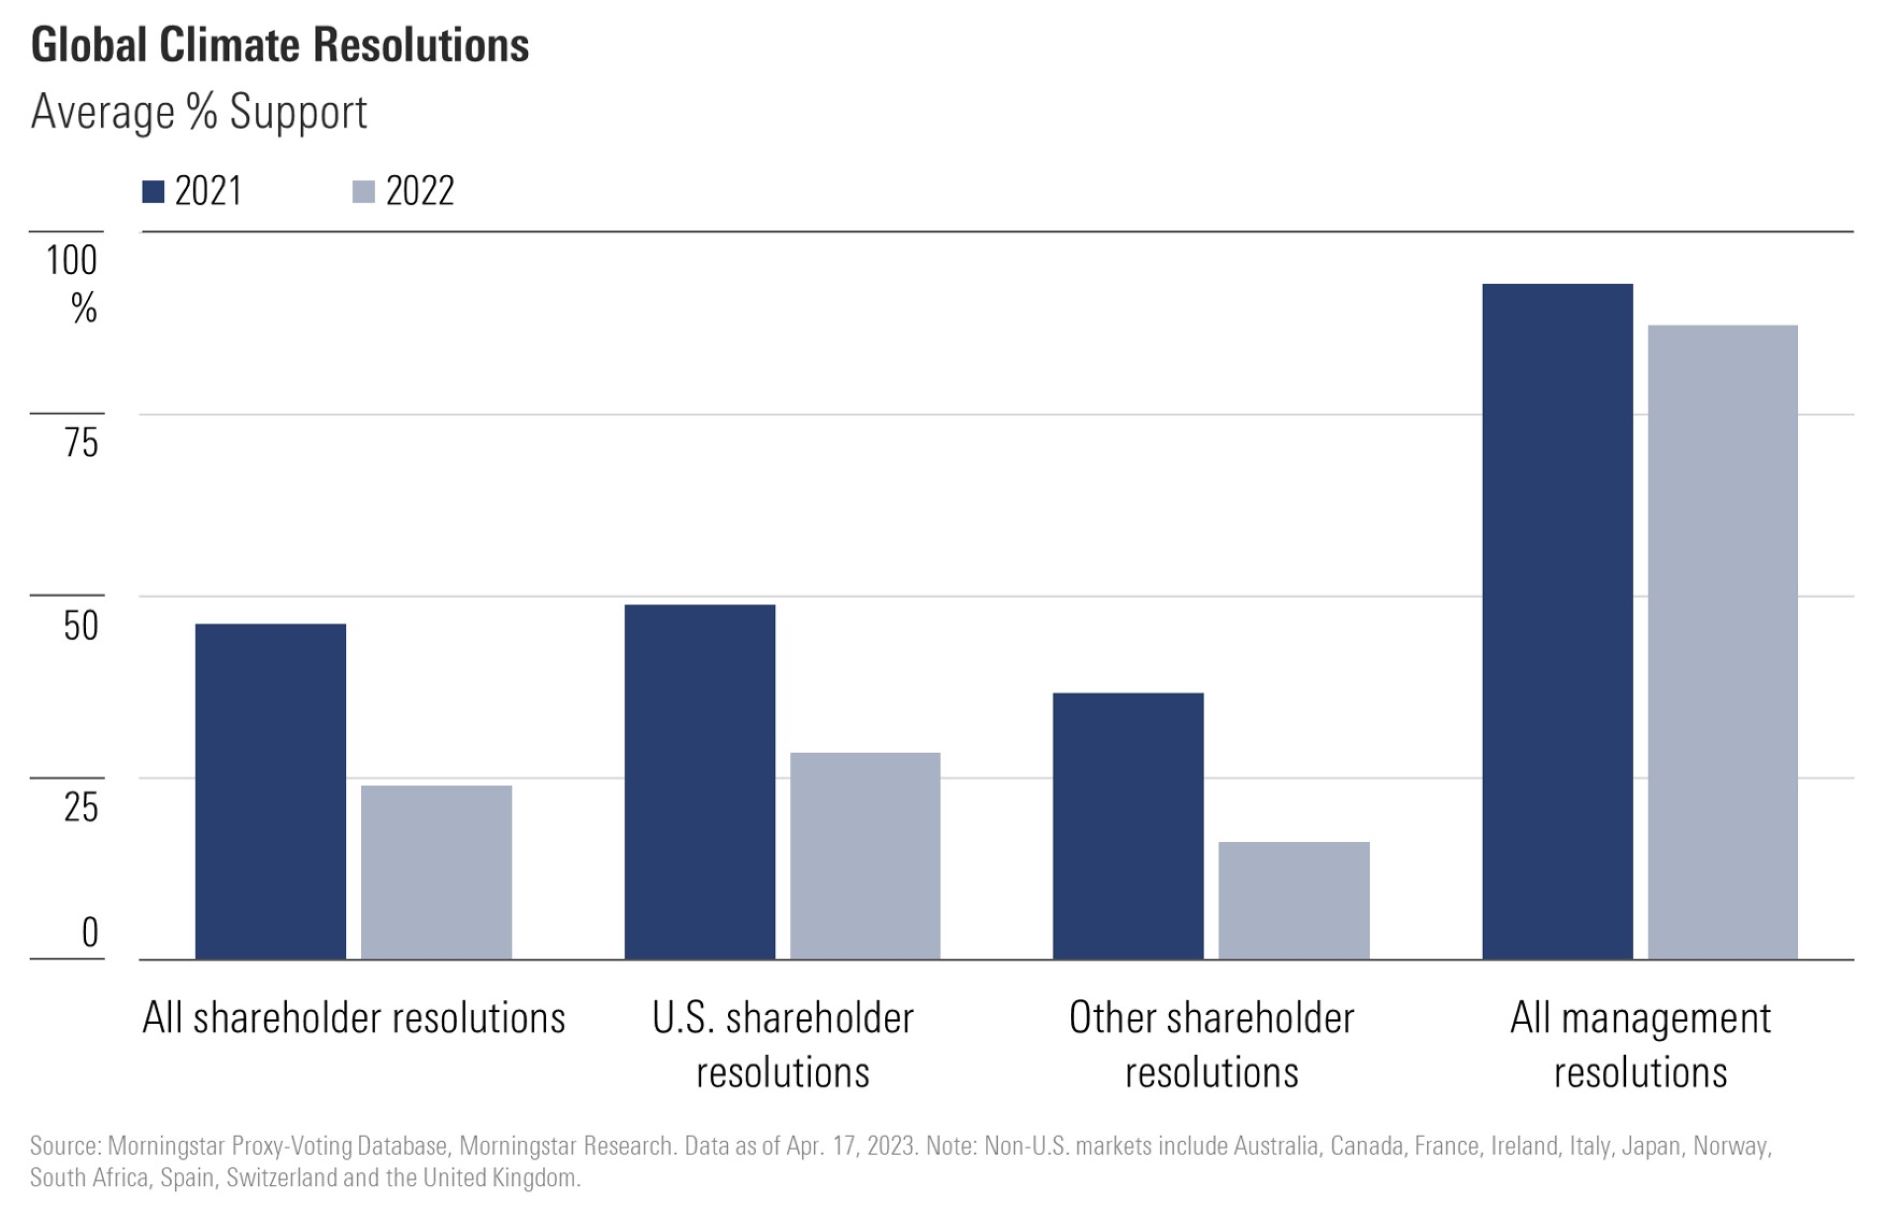 Bar chart showing that average support for climate-related resolutions fell in 2022 versus 2021 for all categories of resolutions.